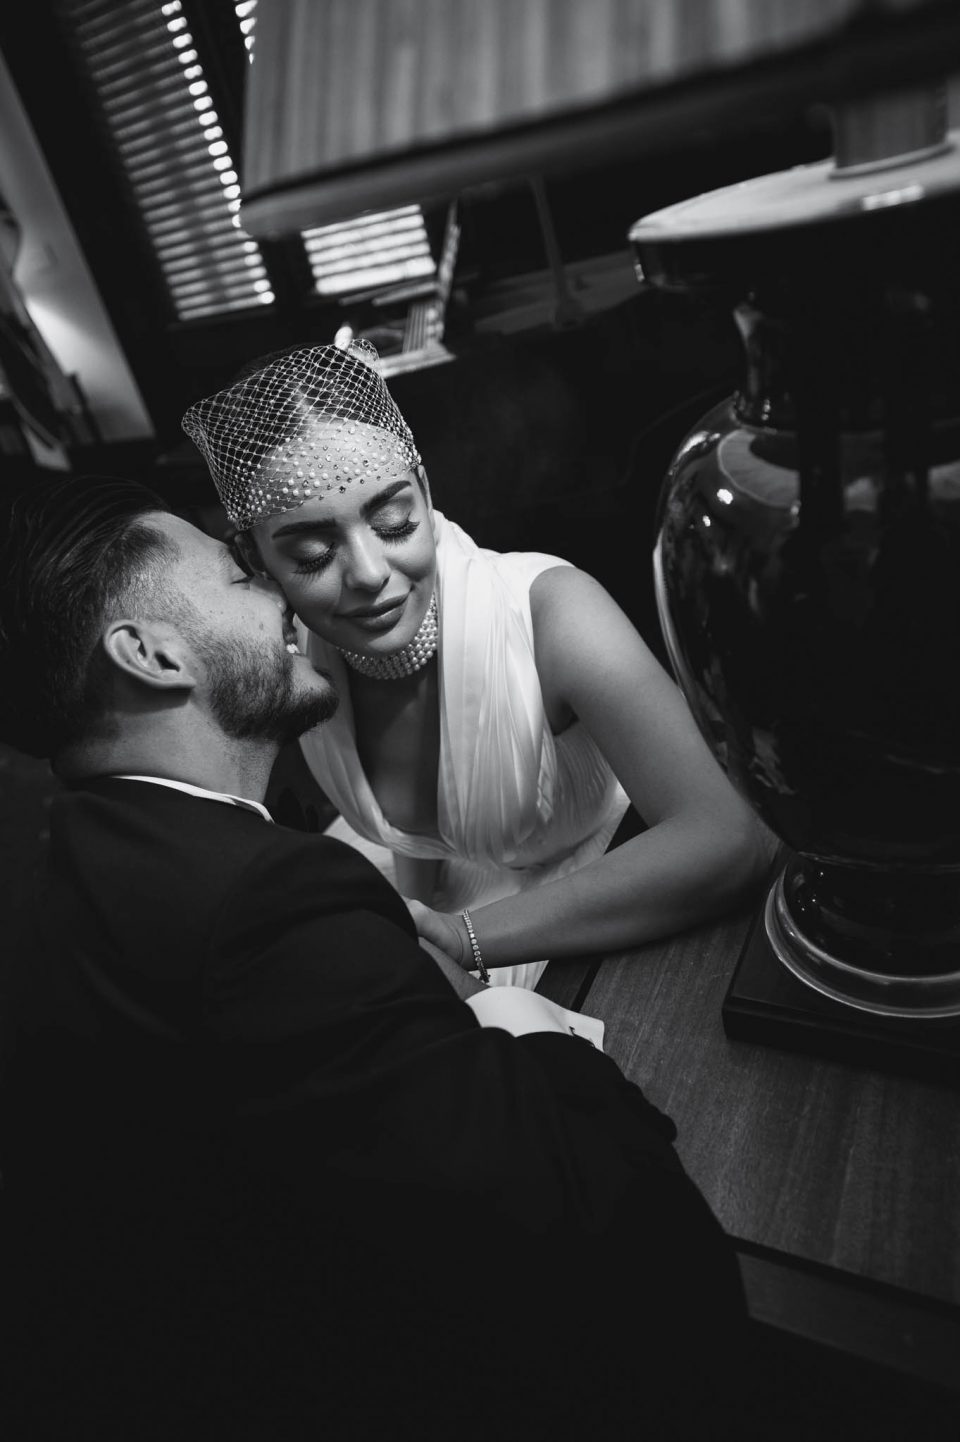 Groom kisses brides ear as she looks down lit by the lamp in the foreground